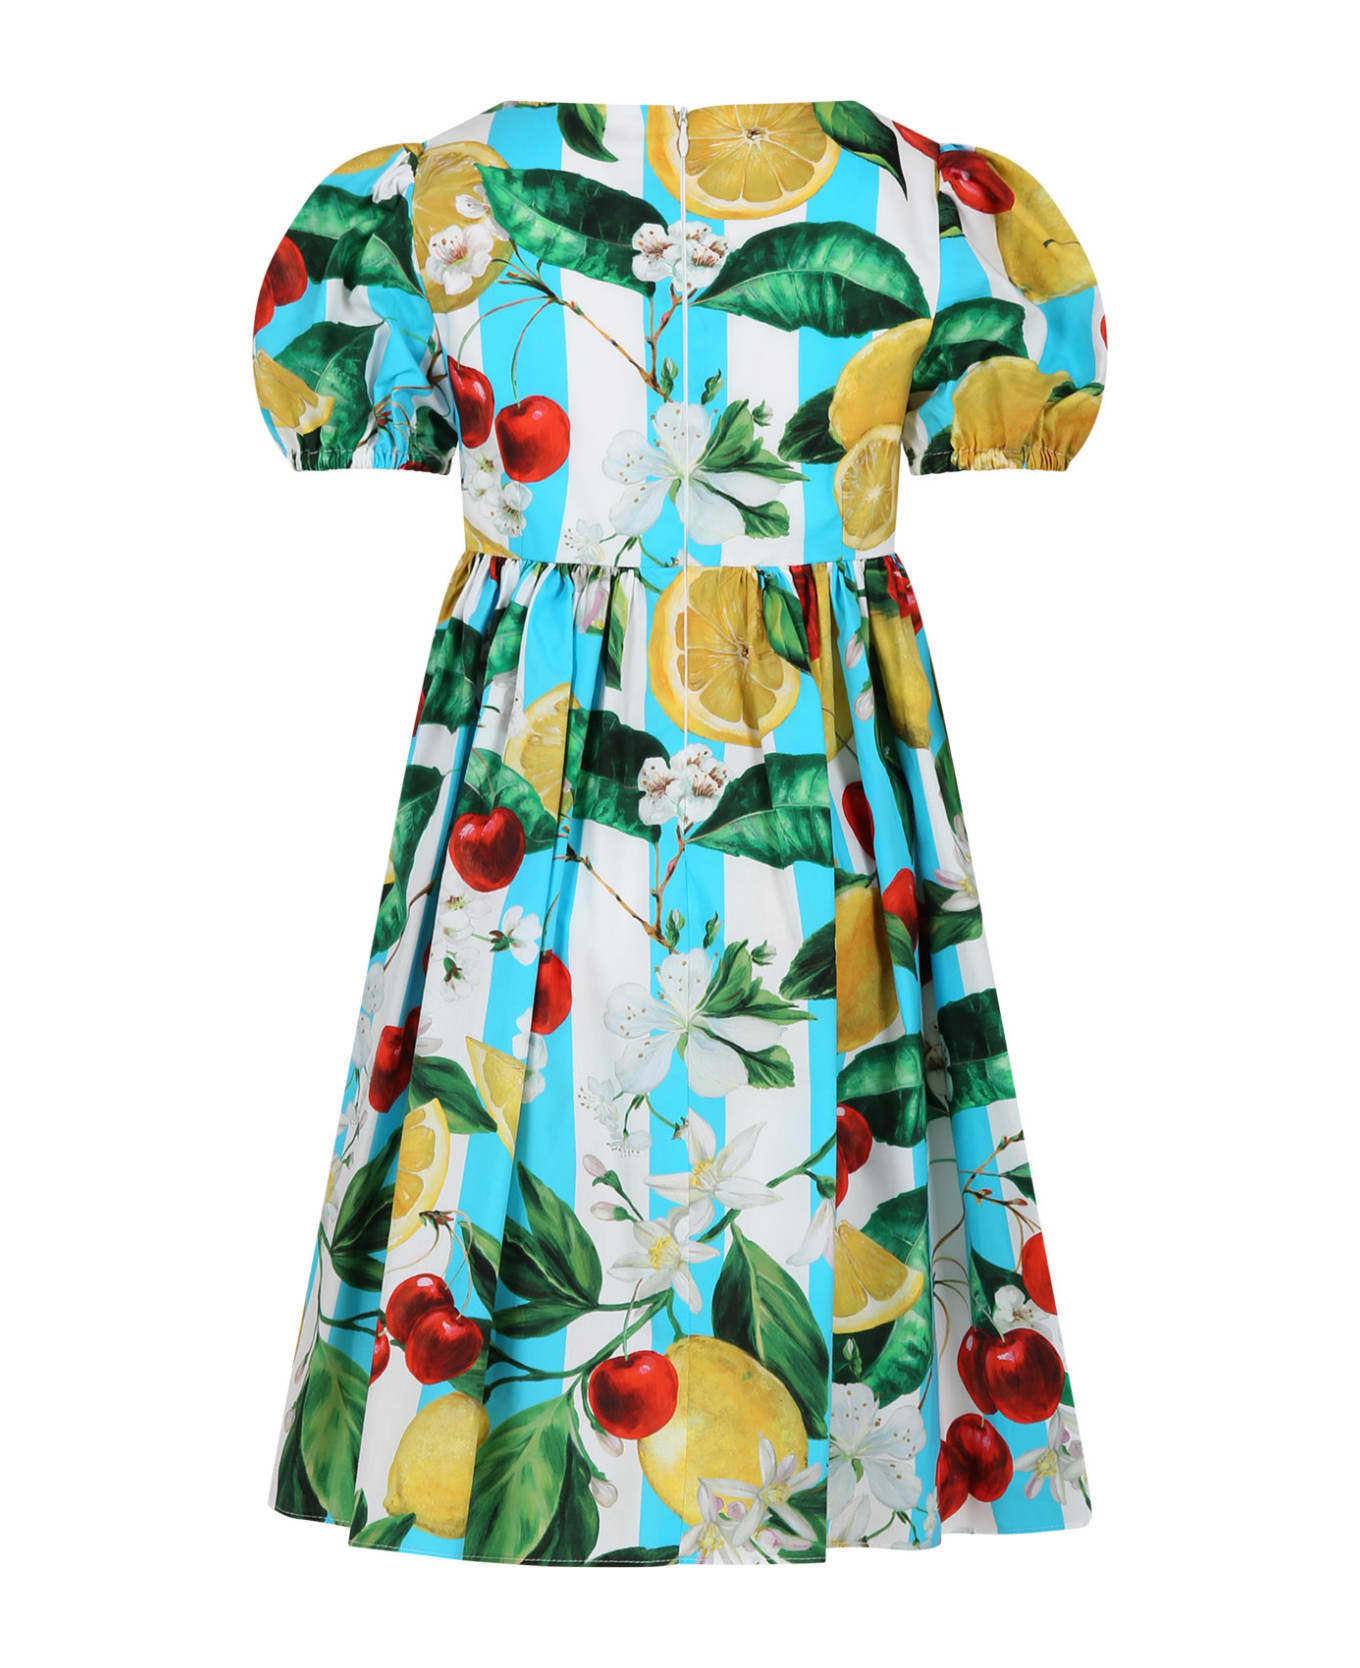 Dolce & Gabbana Multicolor Dress For Girl With All-over Flowers And Fruits - Multicolor